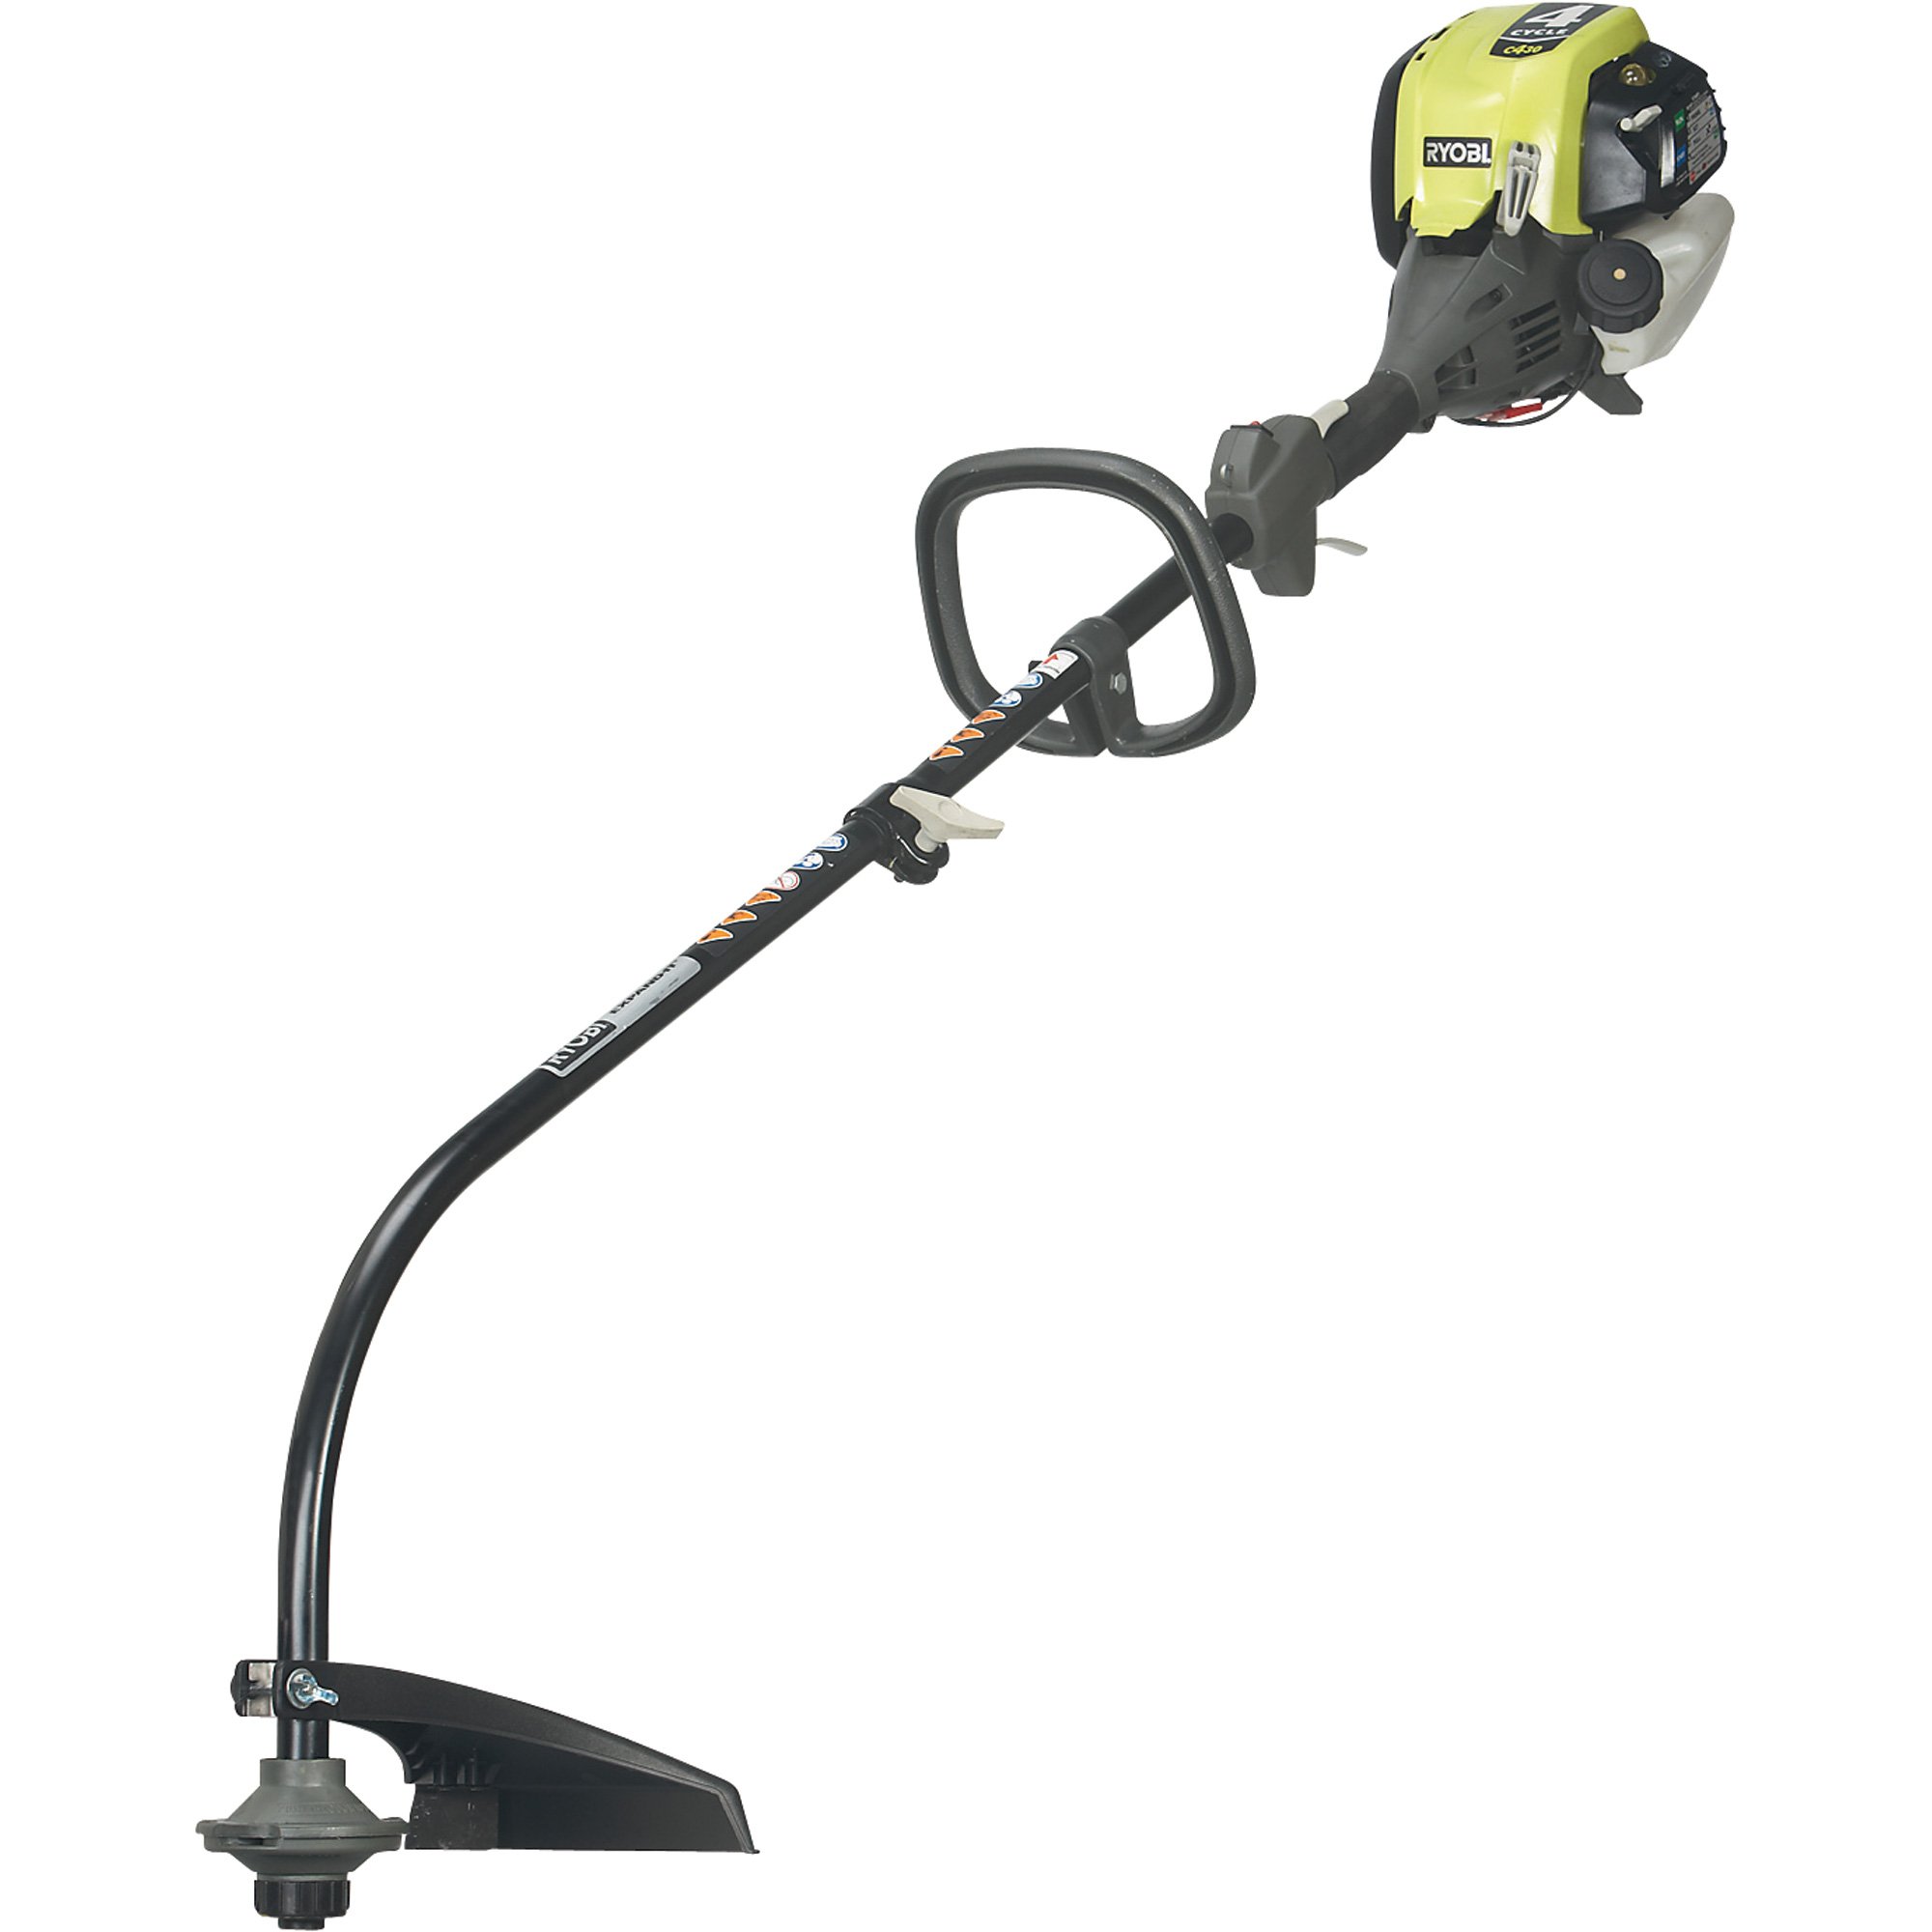 Ryobi Expand It 10 Universal Cultivator String Trimmer Attachment